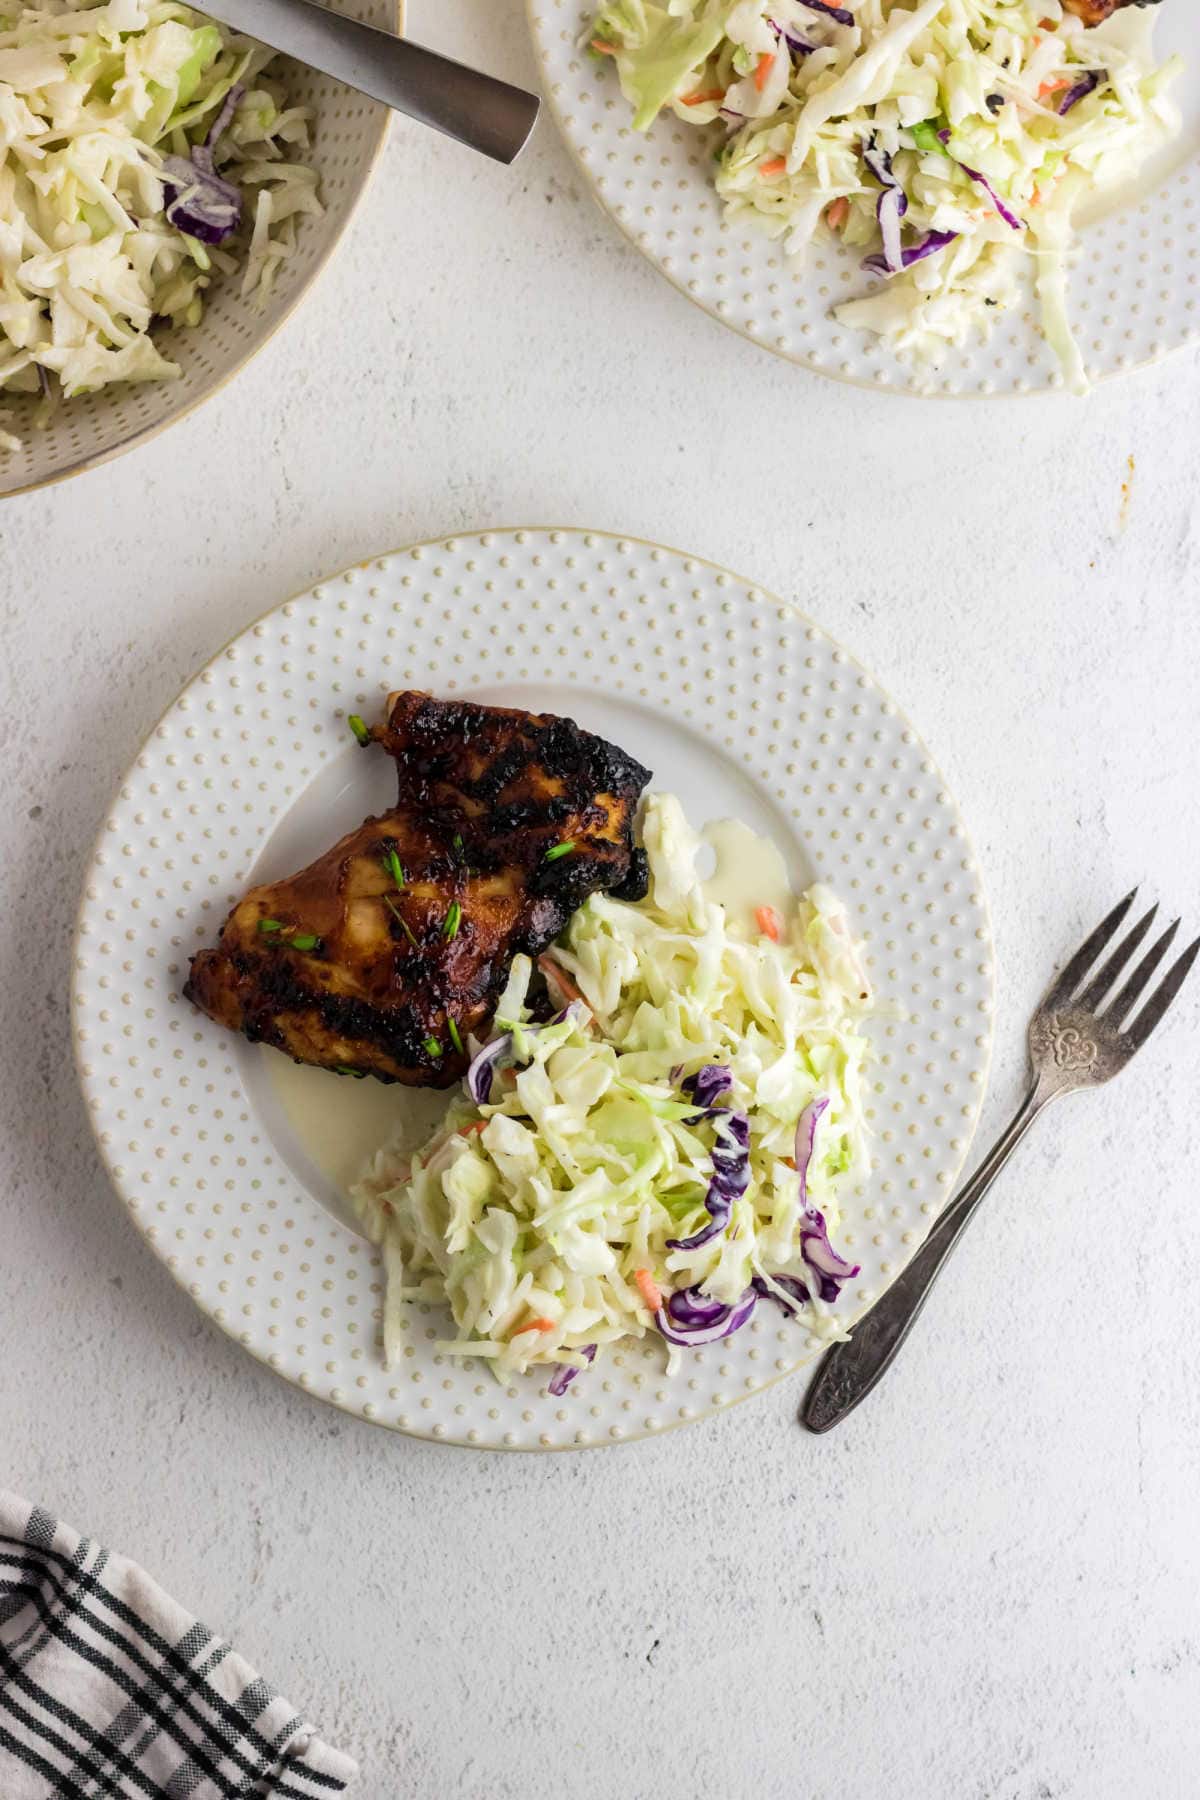 Coleslaw on a plate with bbq chicken.